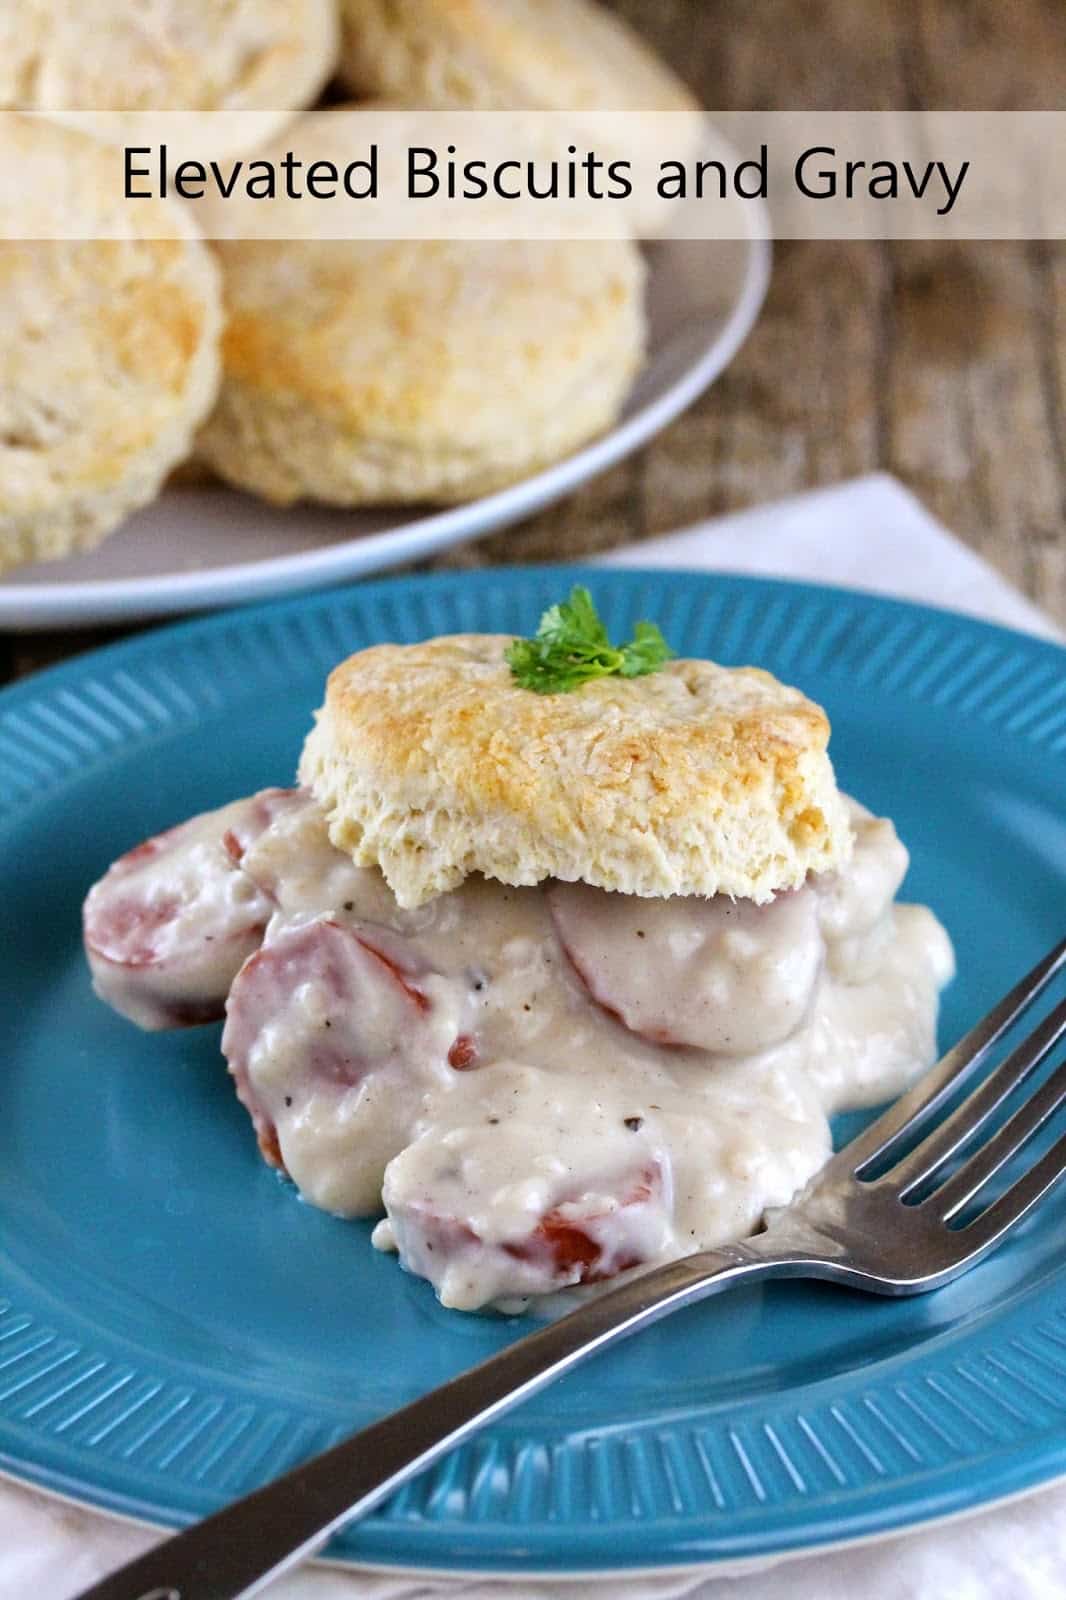 Elevated Biscuits and Gravy: Gravy with slices of sausage is topped with a homemade biscuit and garnished with parsley